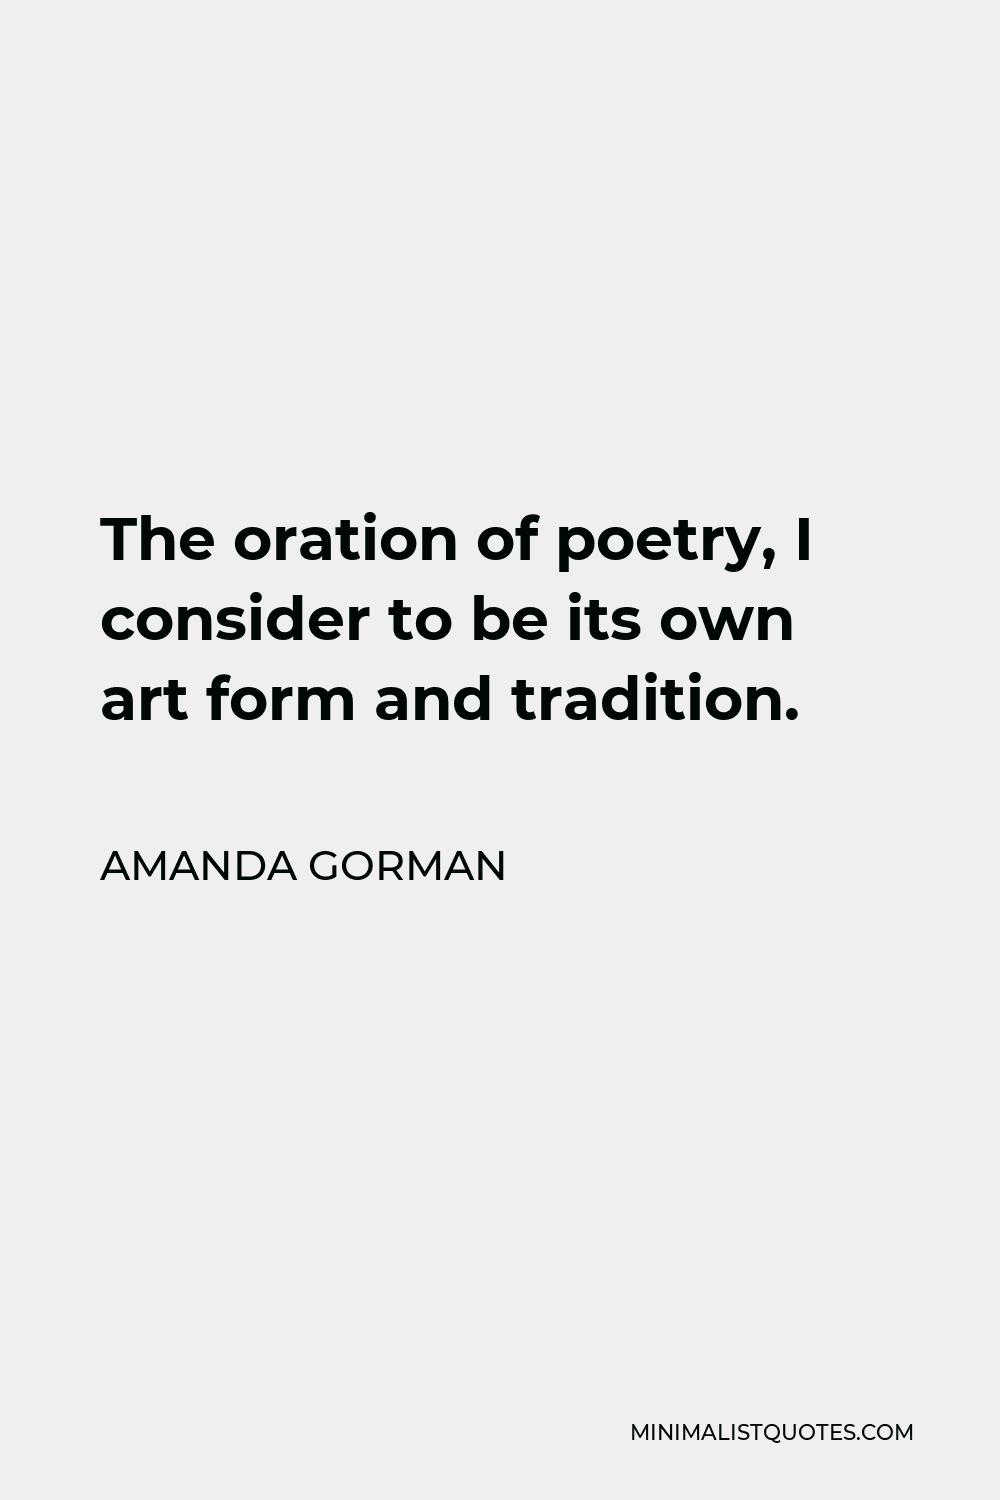 Amanda Gorman Quote - The oration of poetry, I consider to be its own art form and tradition.